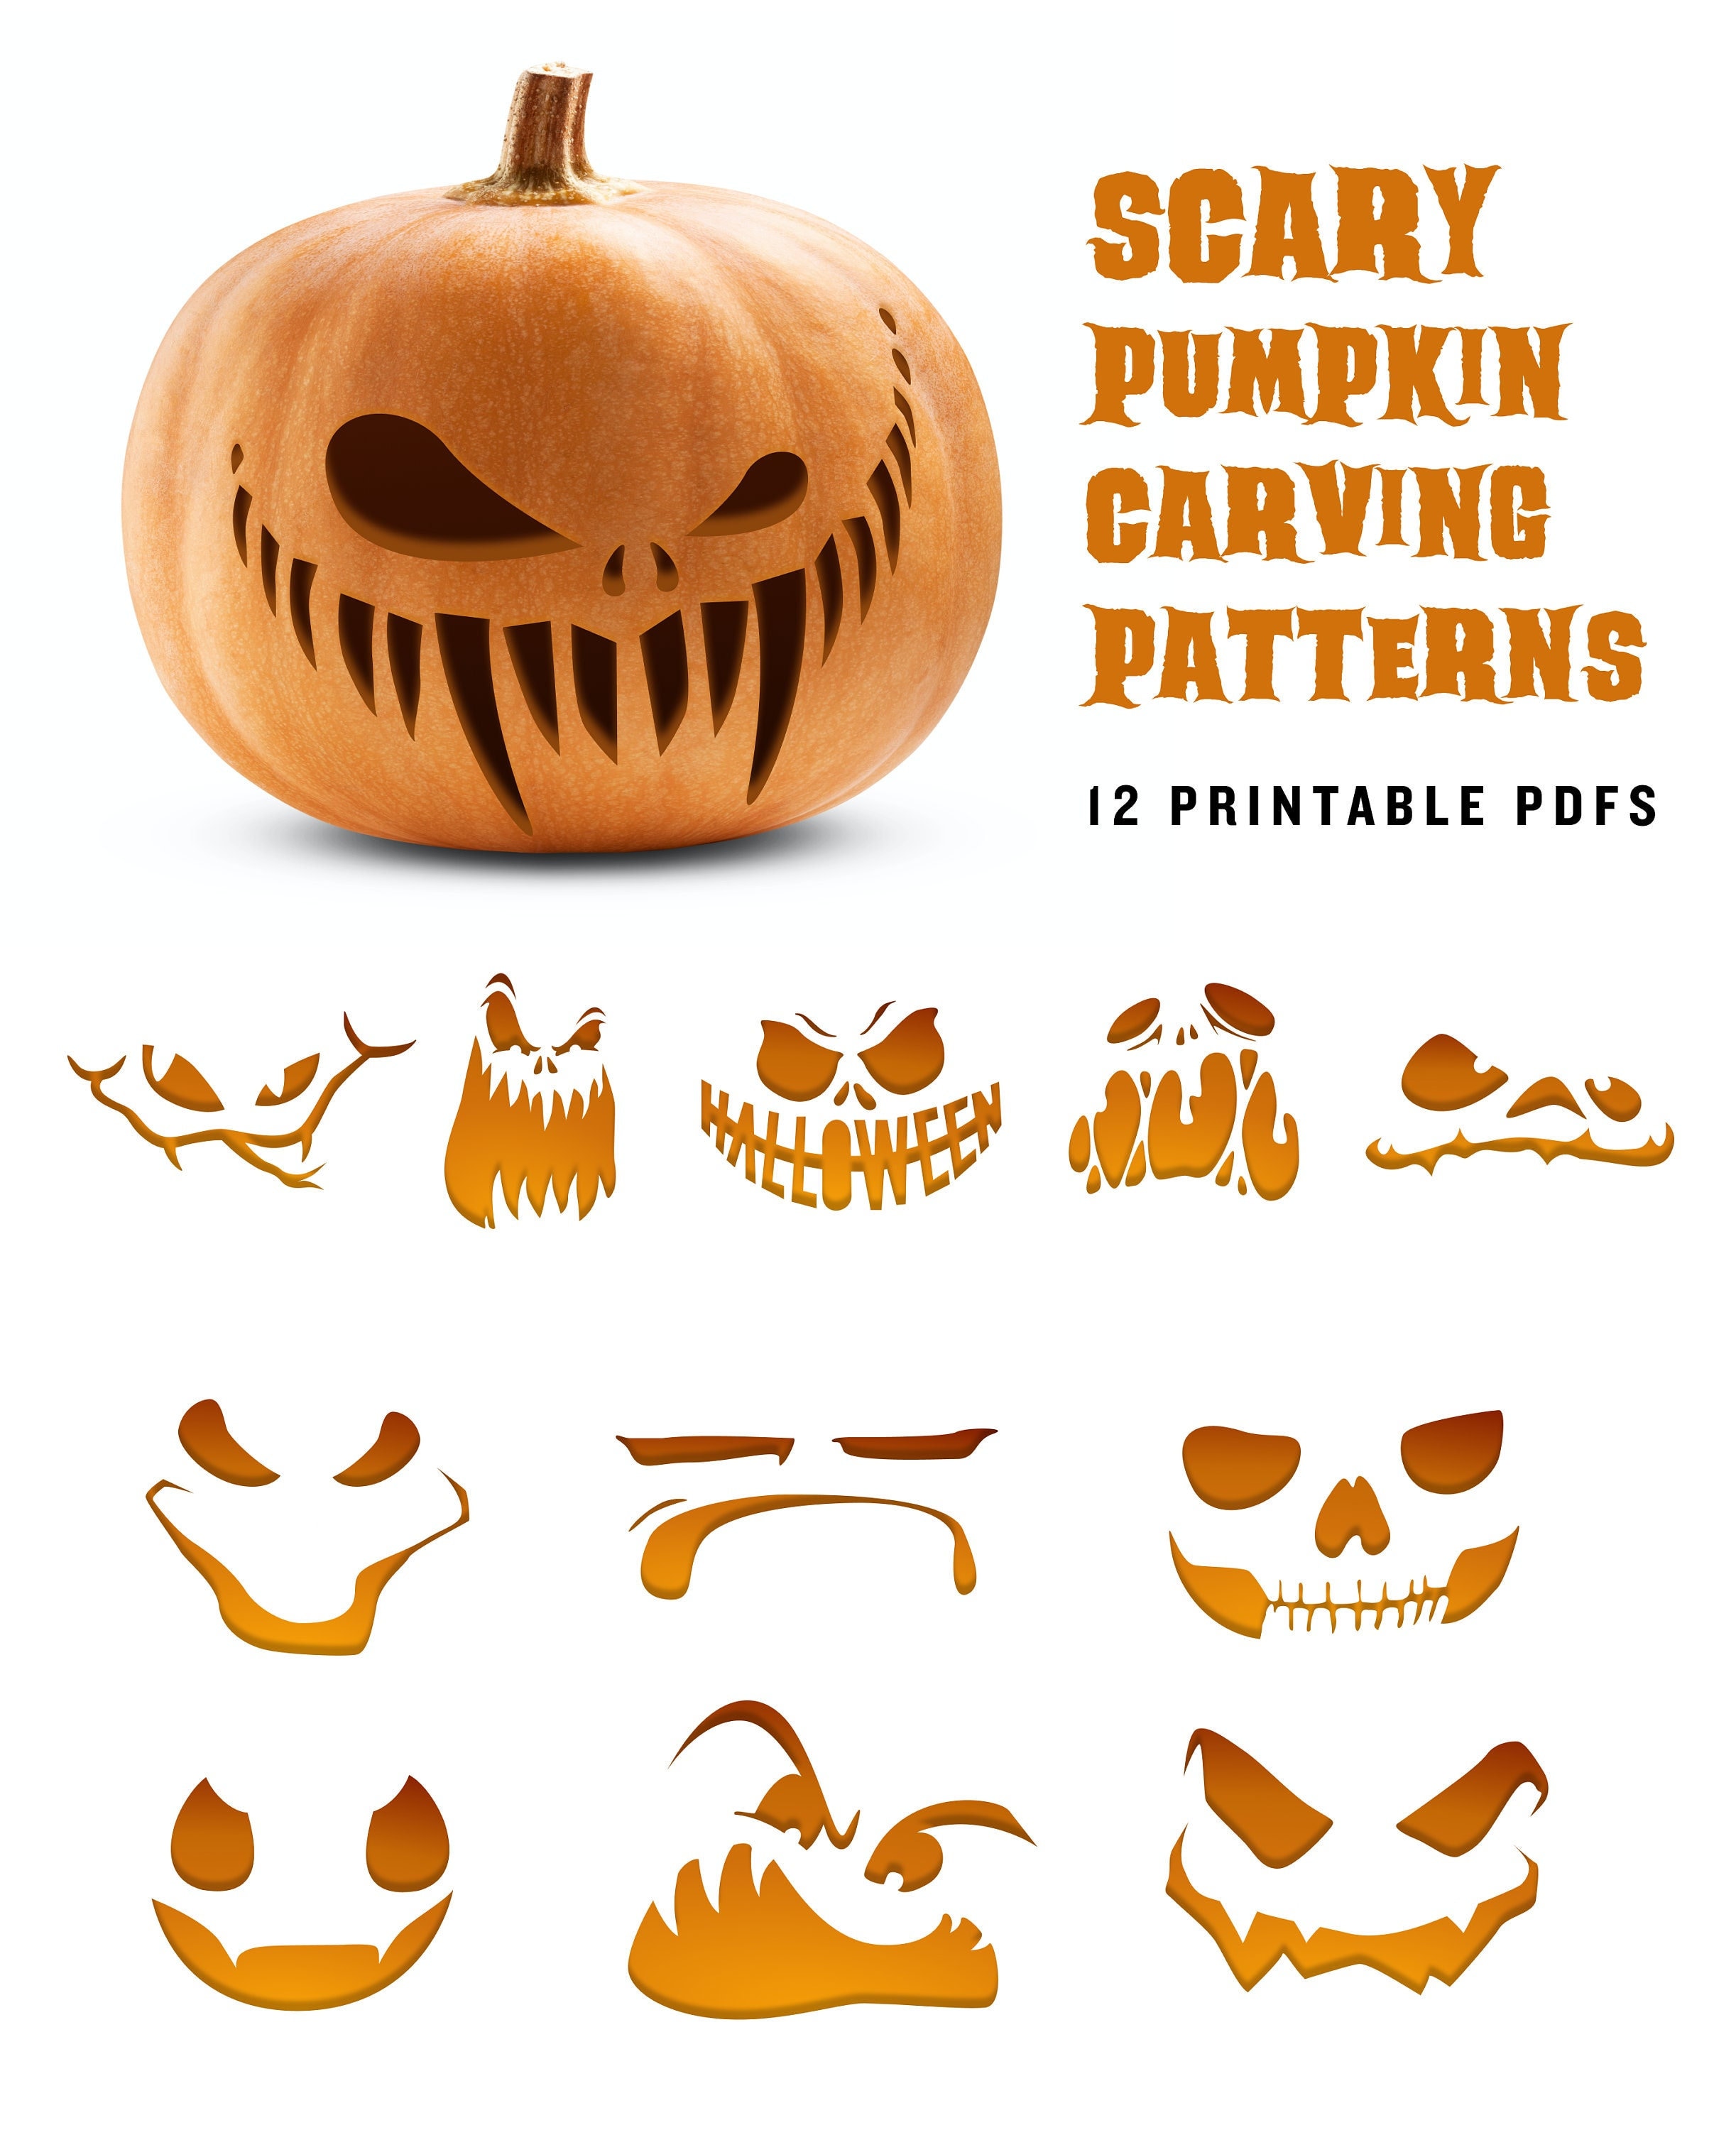 Easy Scary Face Pumpkin Carving Ideas Your Neighbors Will Envy!